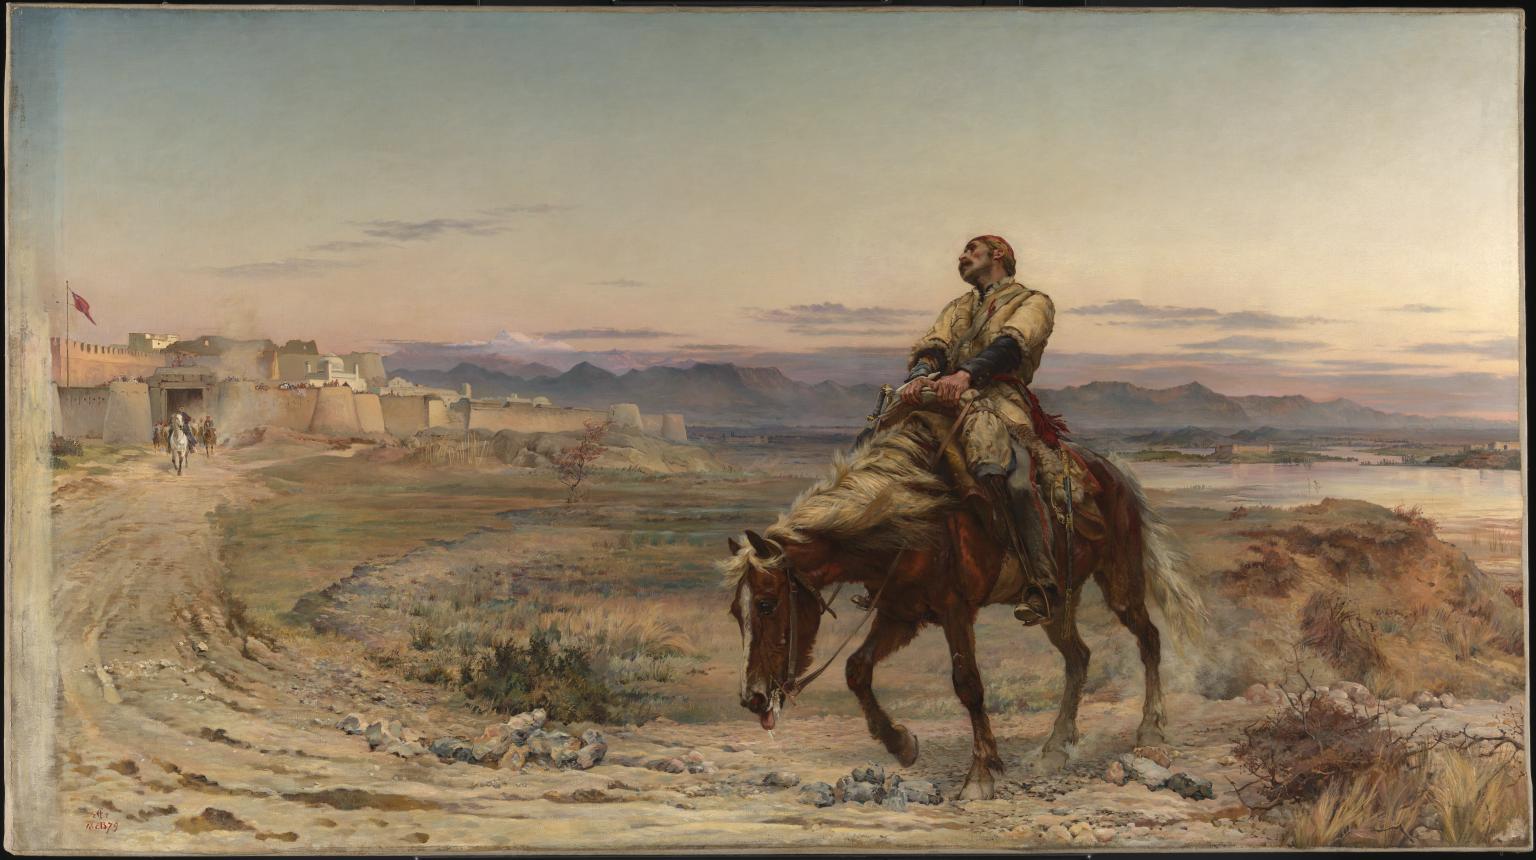 The Remnants of an Army 1879 by Elizabeth Butler (Lady Butler) 1846-1933